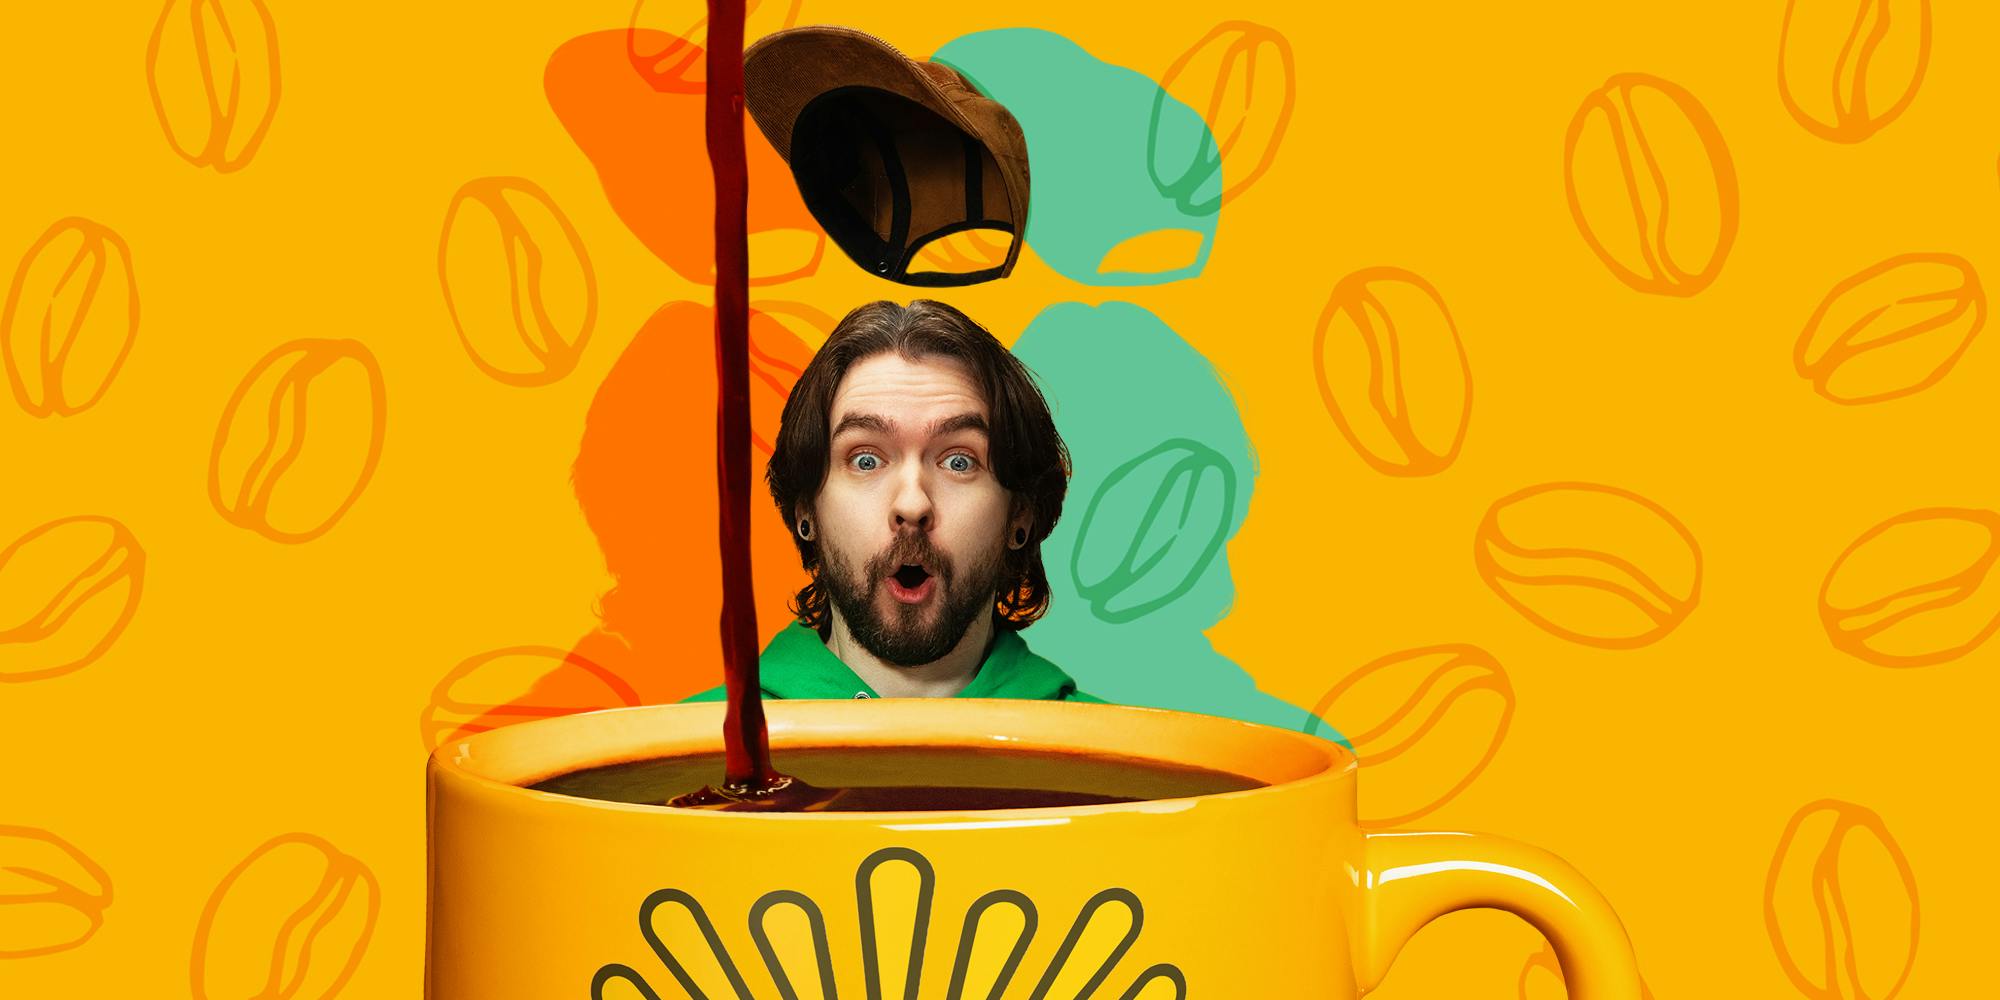 Coffee, Comics, and Content: YouTuber Jacksepticeye on Turning Passions Into Serious Business